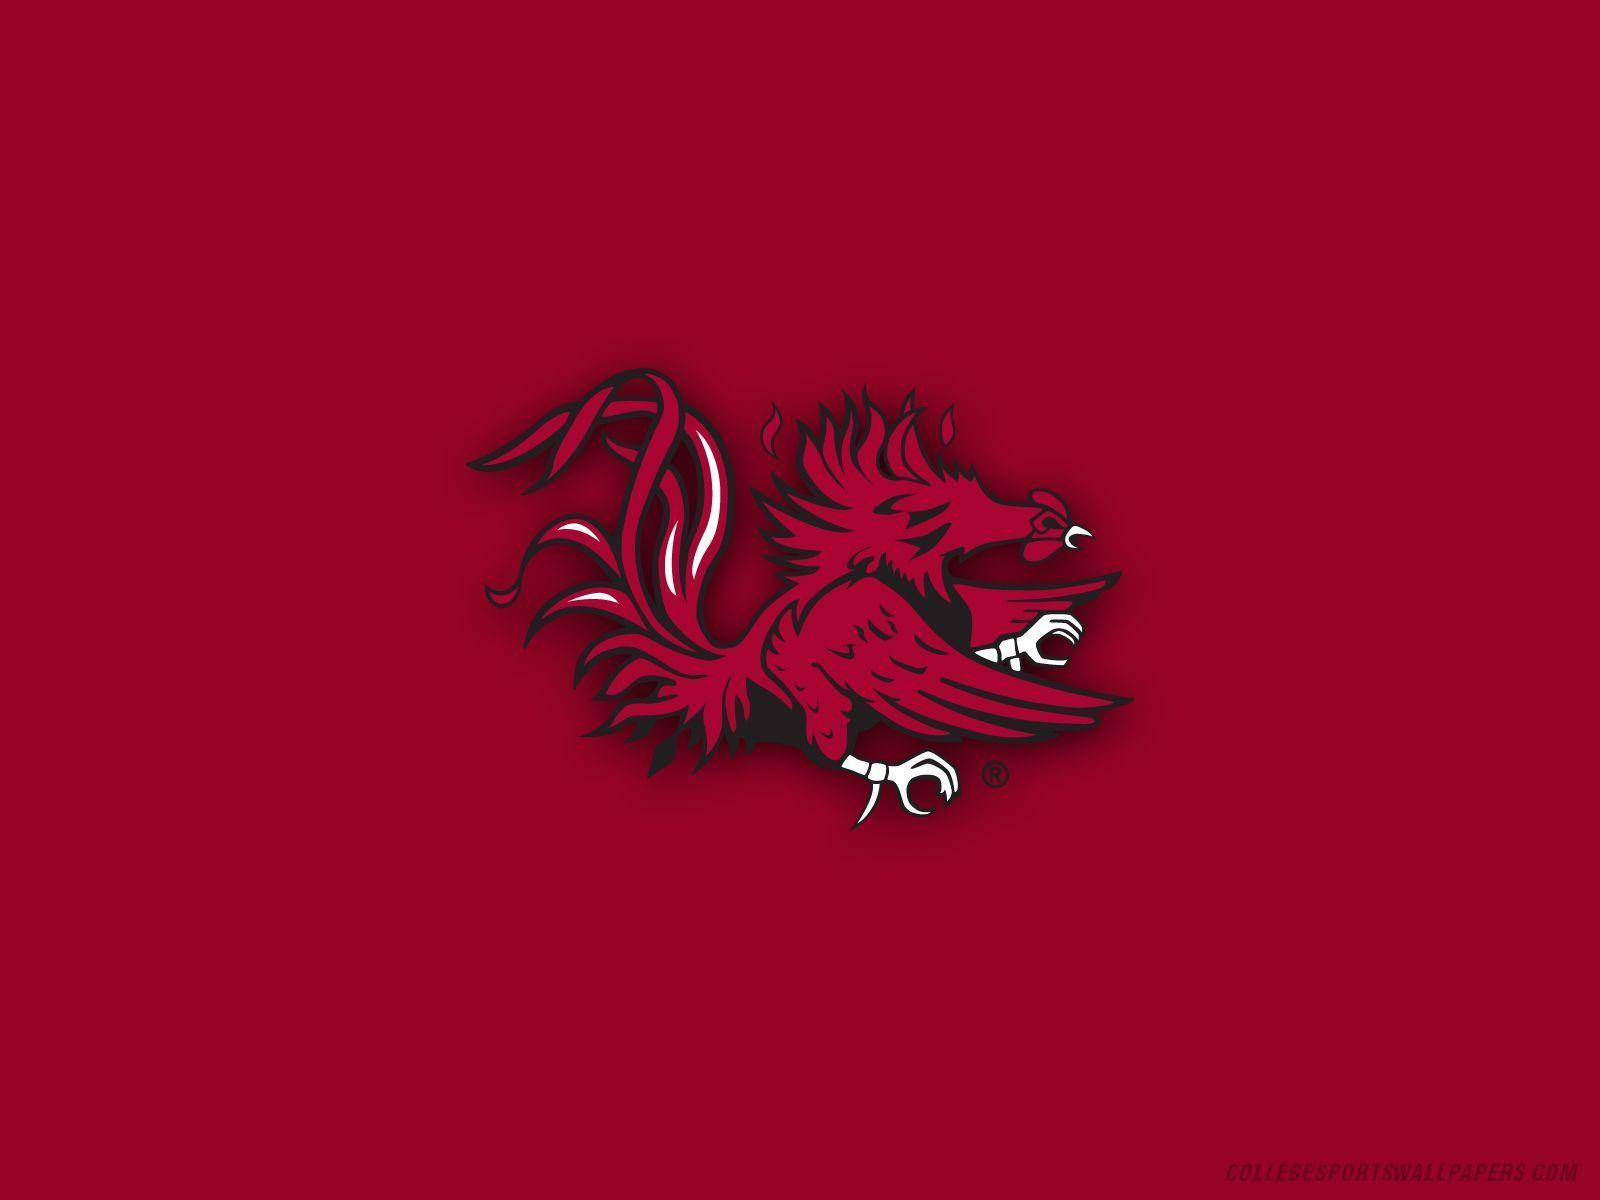 South Carolina USC Gamecocks iPhone Wallpaper Colleges in 1600x1200